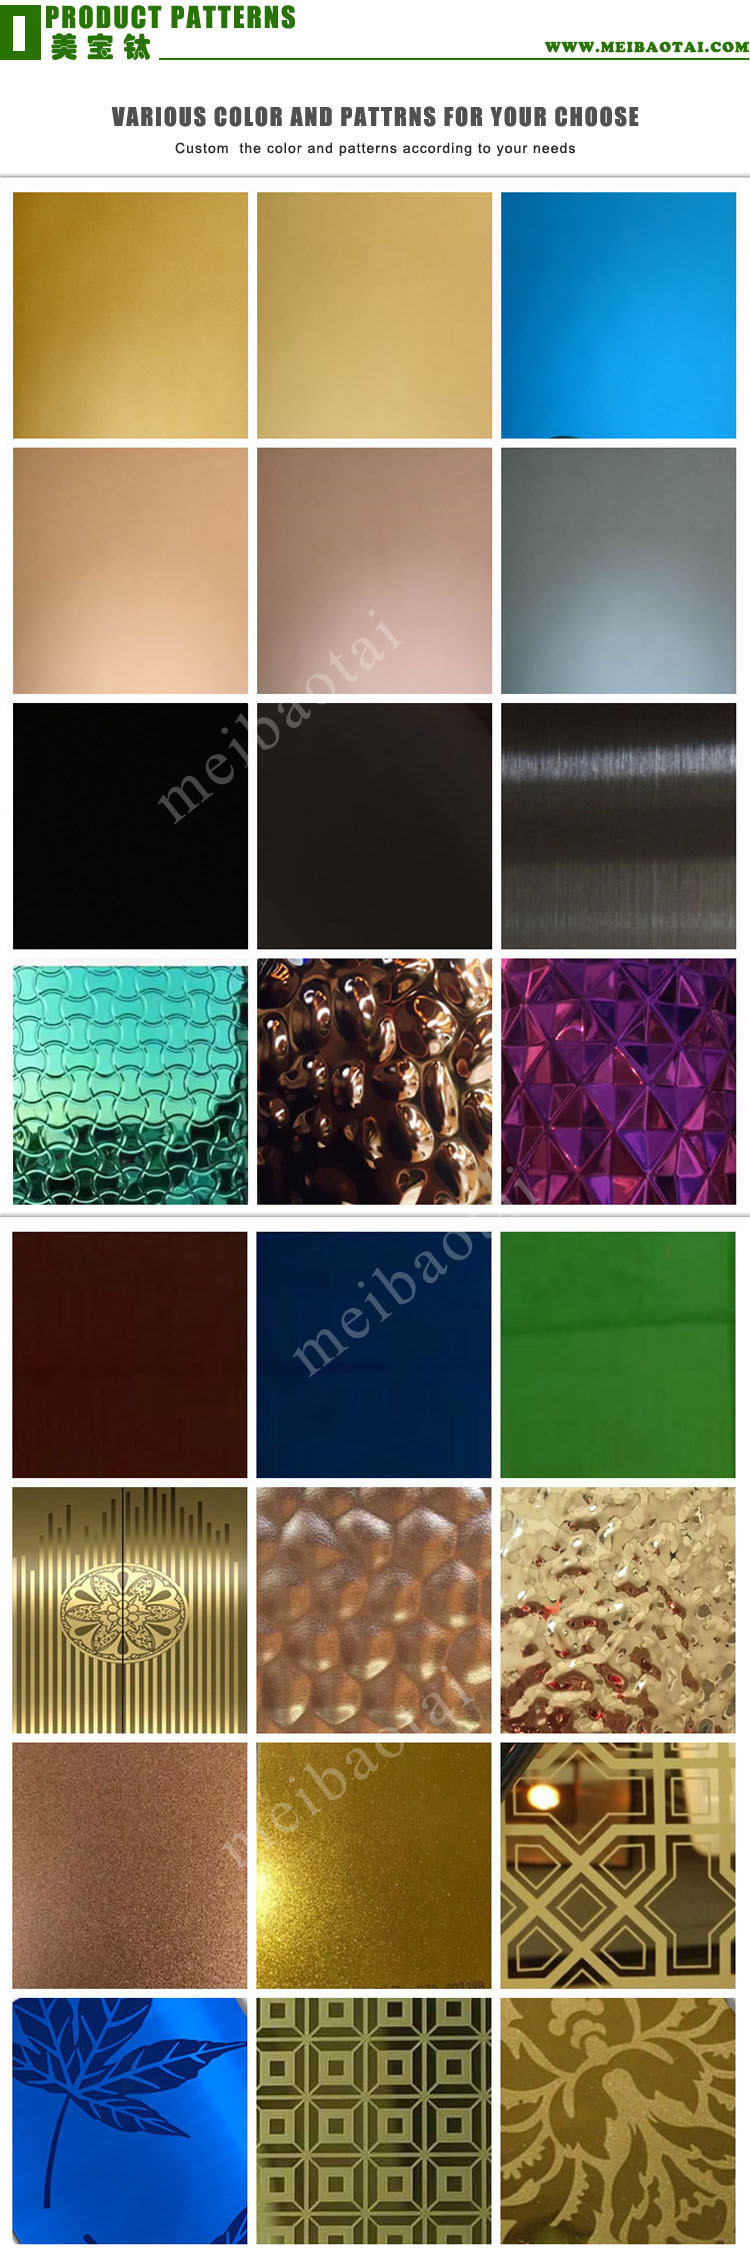 Factory 201 Mirror Stainless Steel Sheet Colored Stainless Steel Sheets in The Philippines Decorative Stainless Steel Sheet